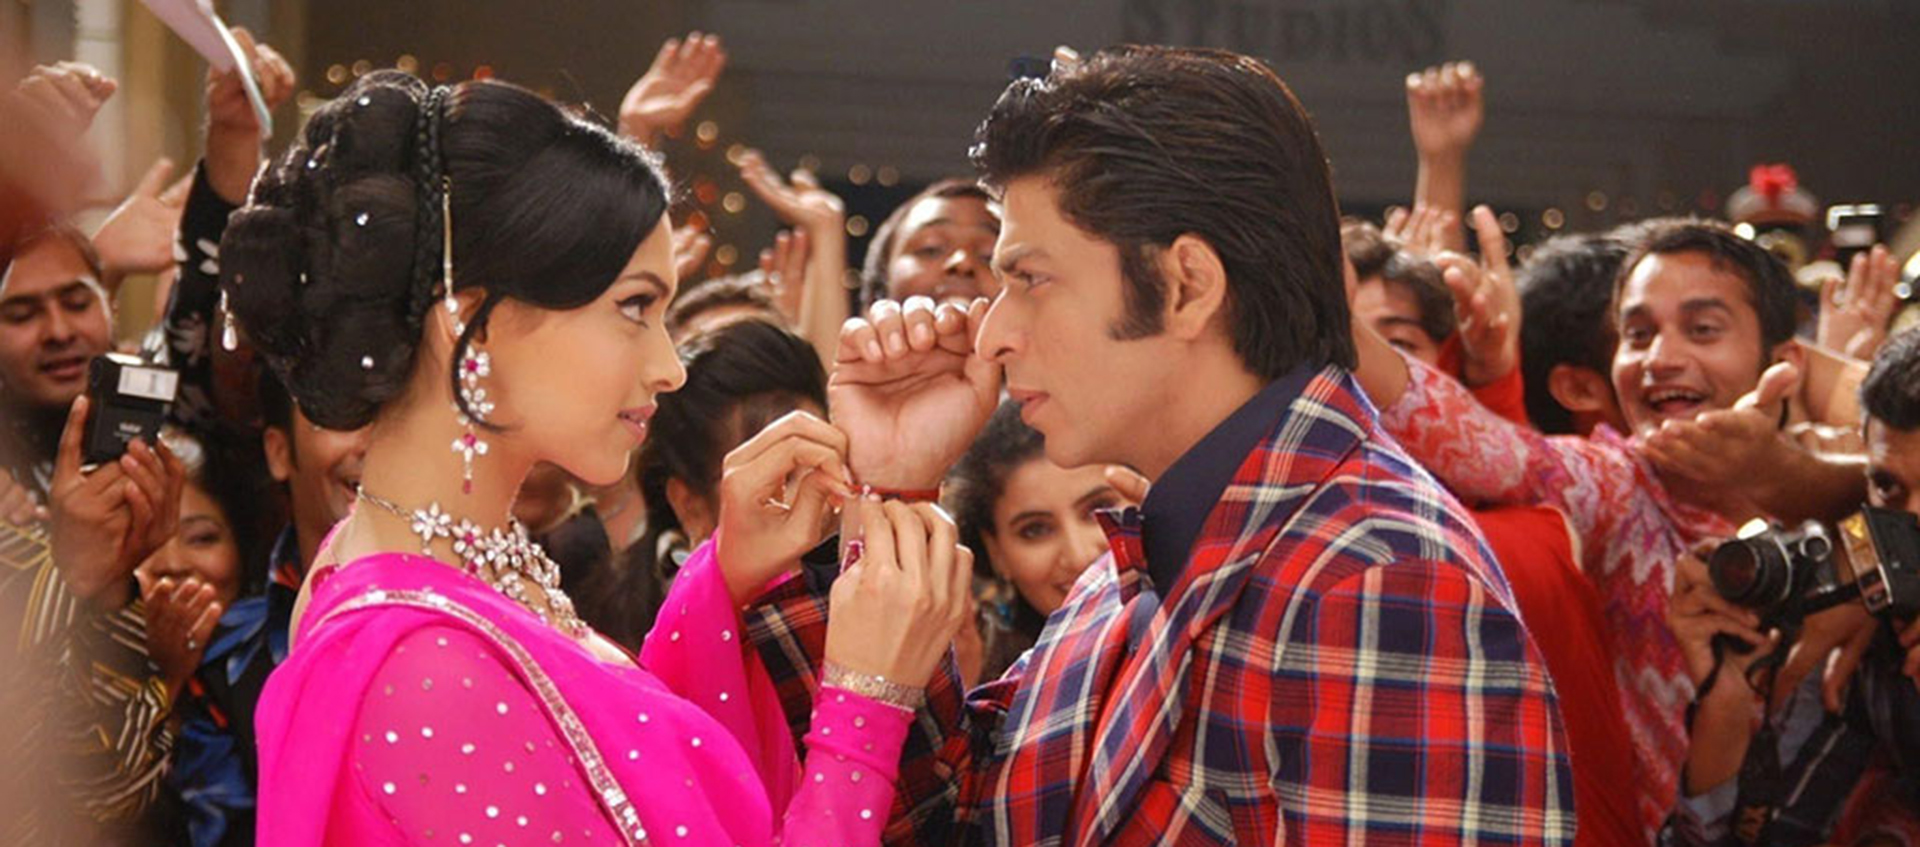 A man and woman stand facing eachother surrounded by a crowd. She wears a hot pink sari and he wears a plaid suit.